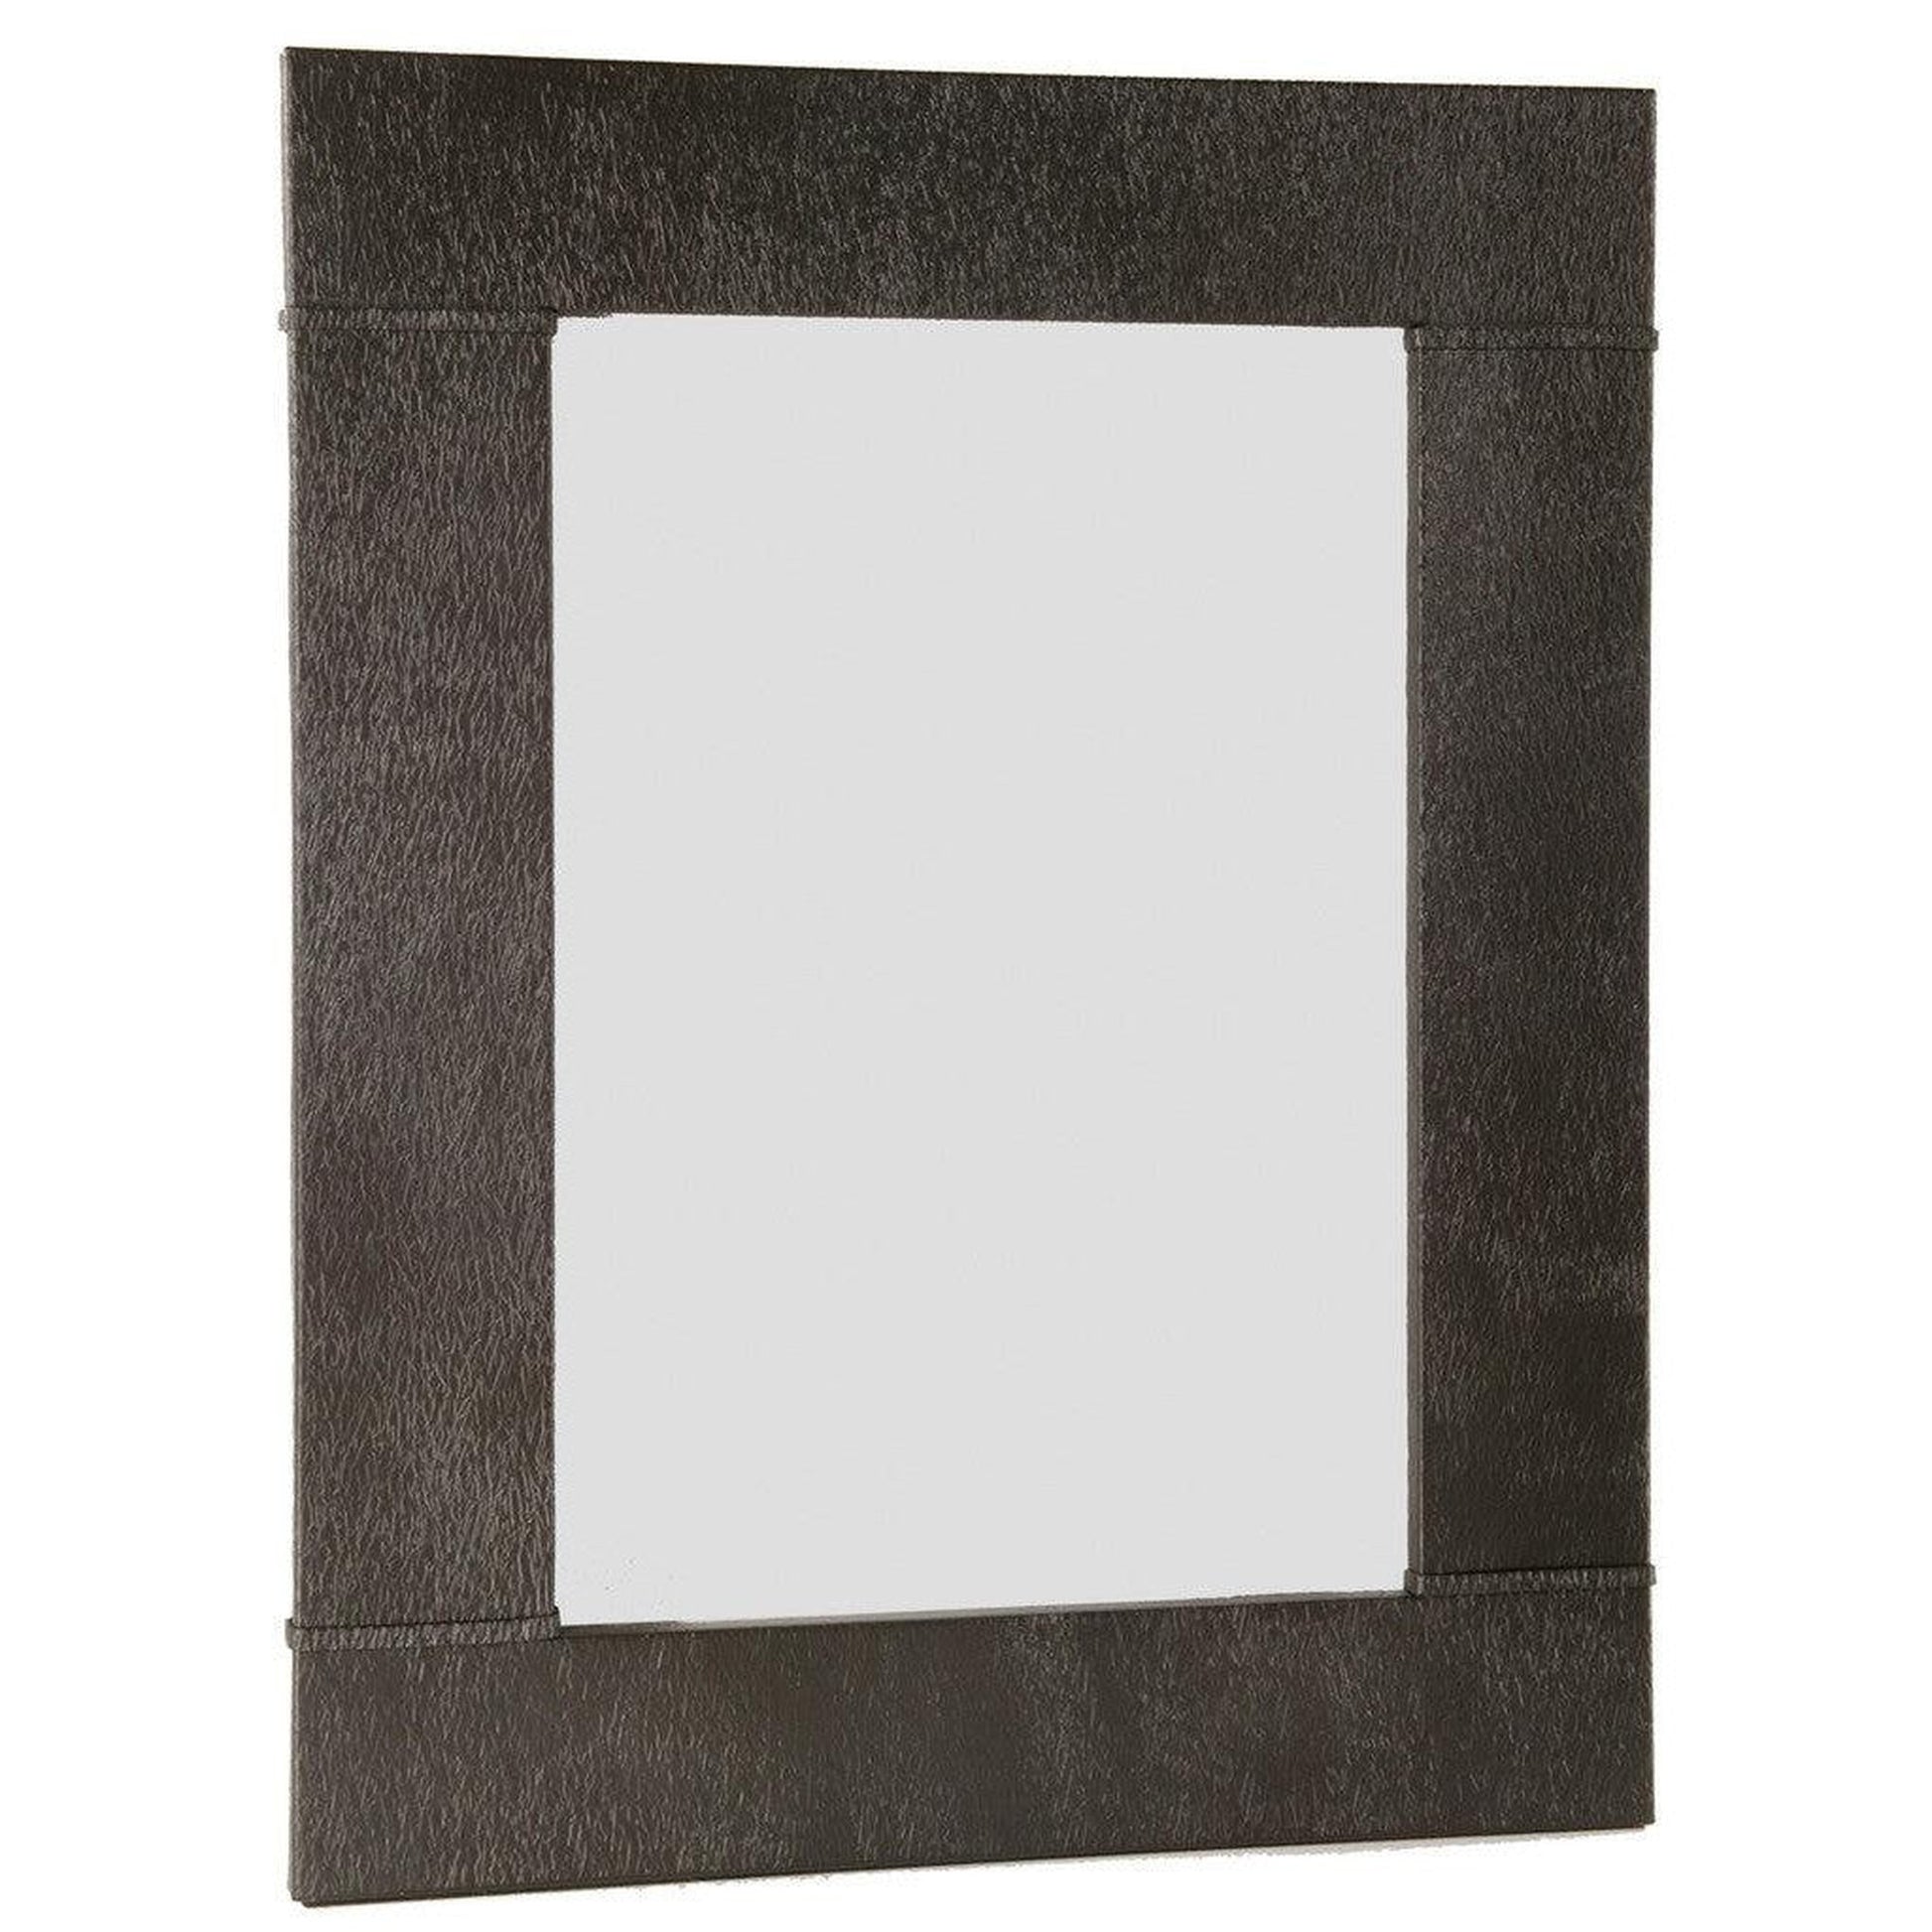 Stone County Ironworks Cedarvale 37" x 45" Large Natural Black Iron Wall Mirror With Pewter Iron Accent